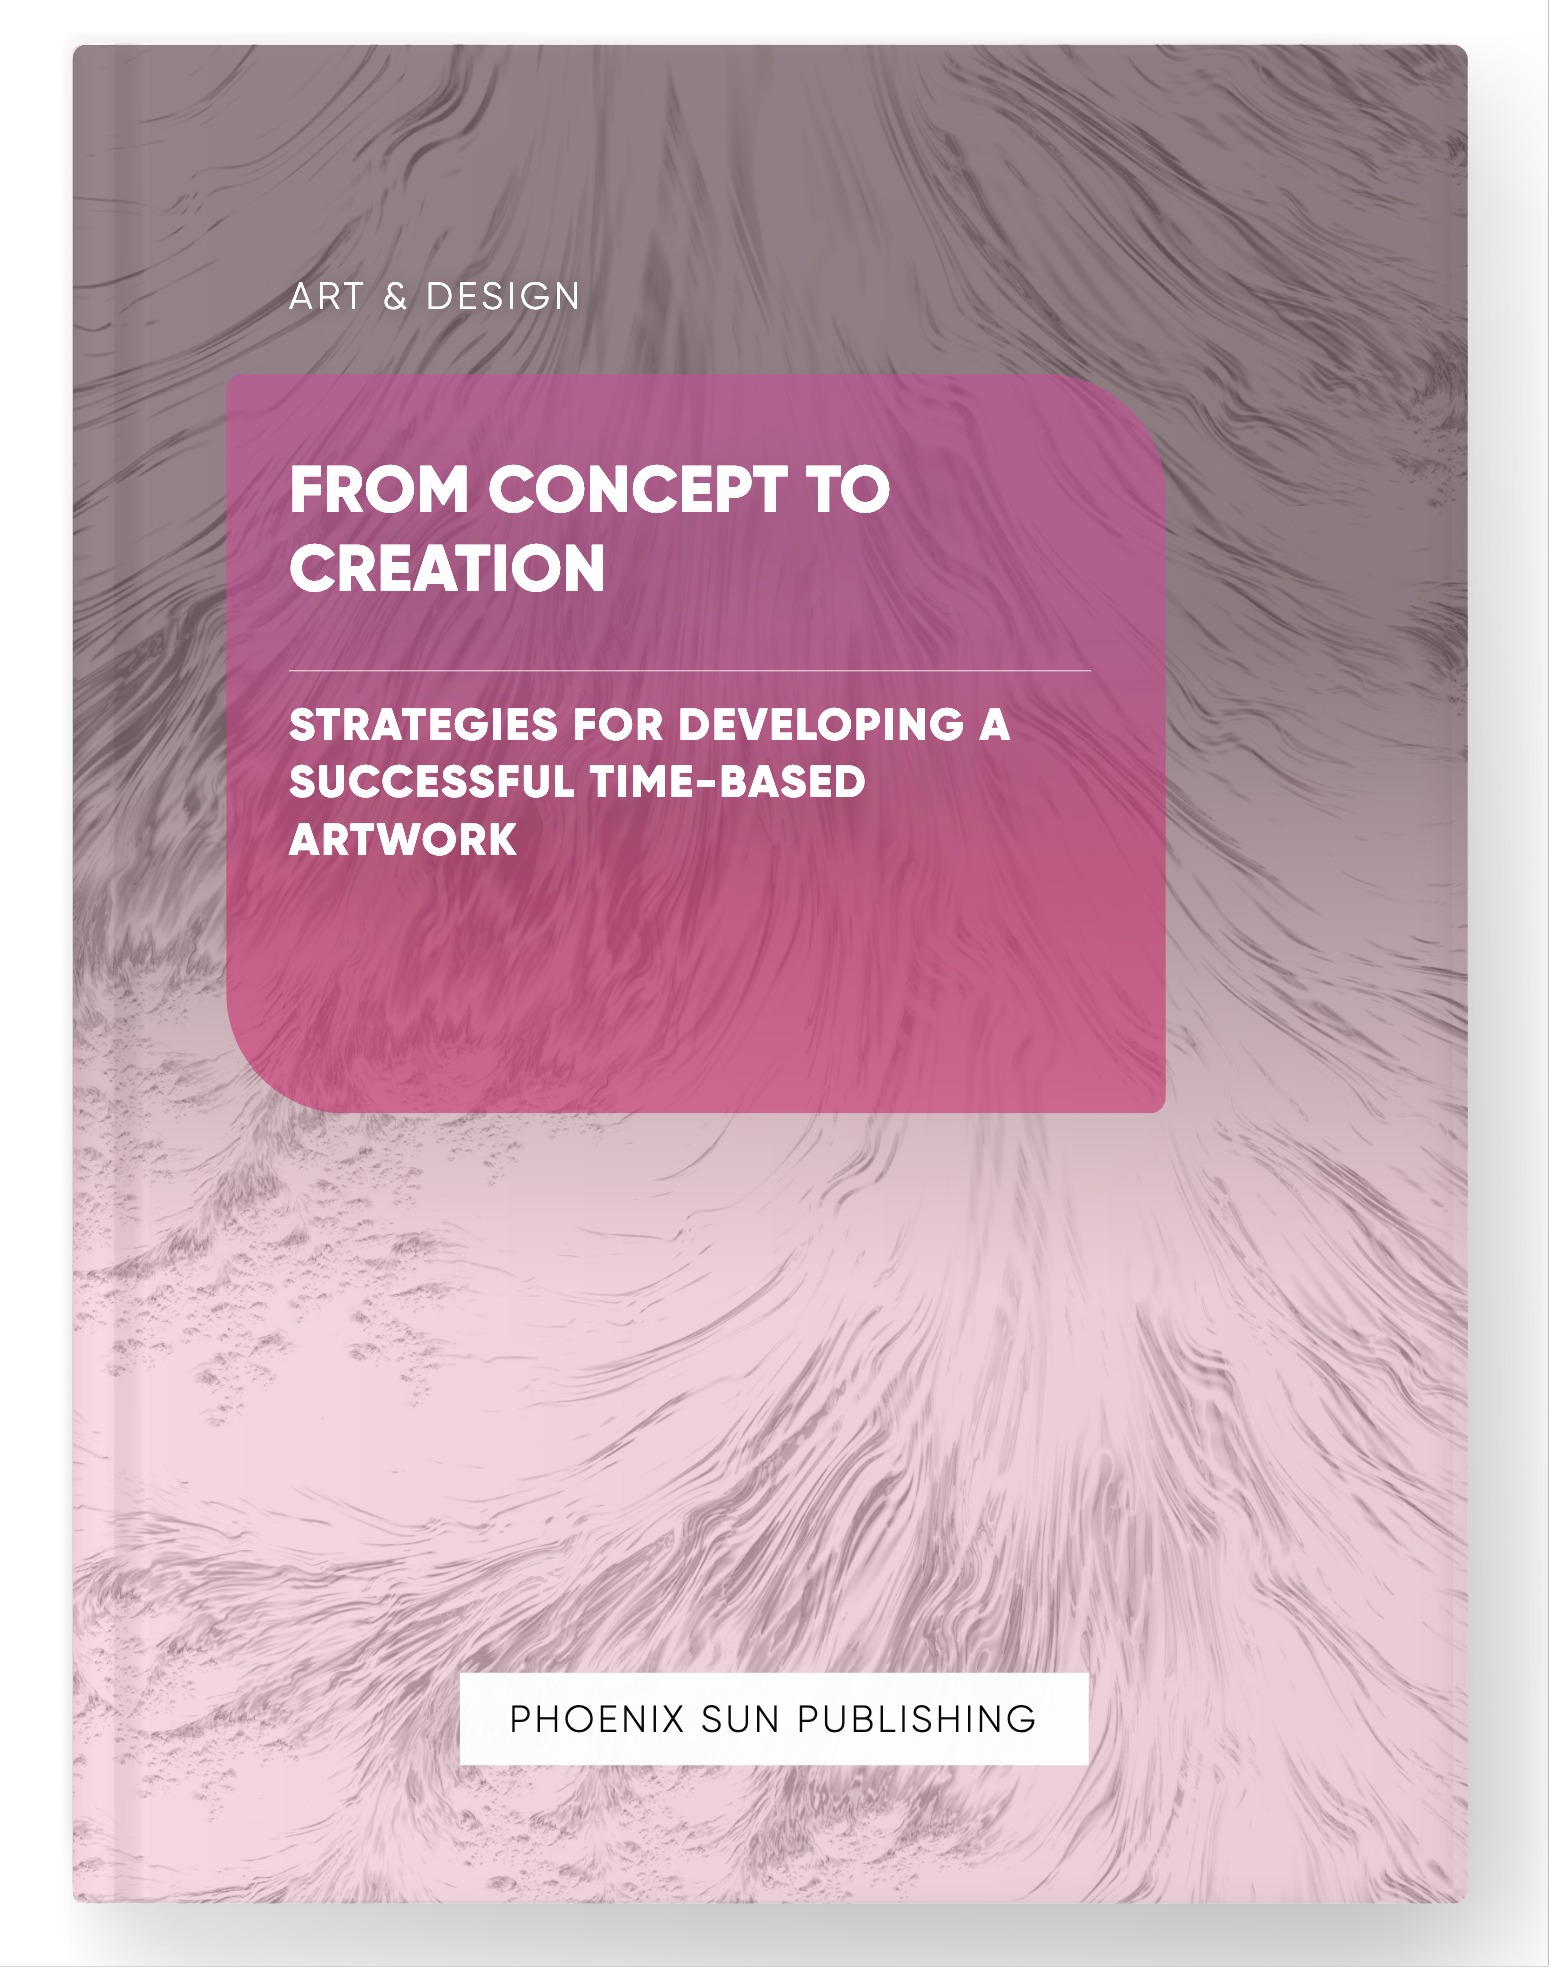 From Concept to Creation – Strategies for Developing a Successful Time-based Artwork